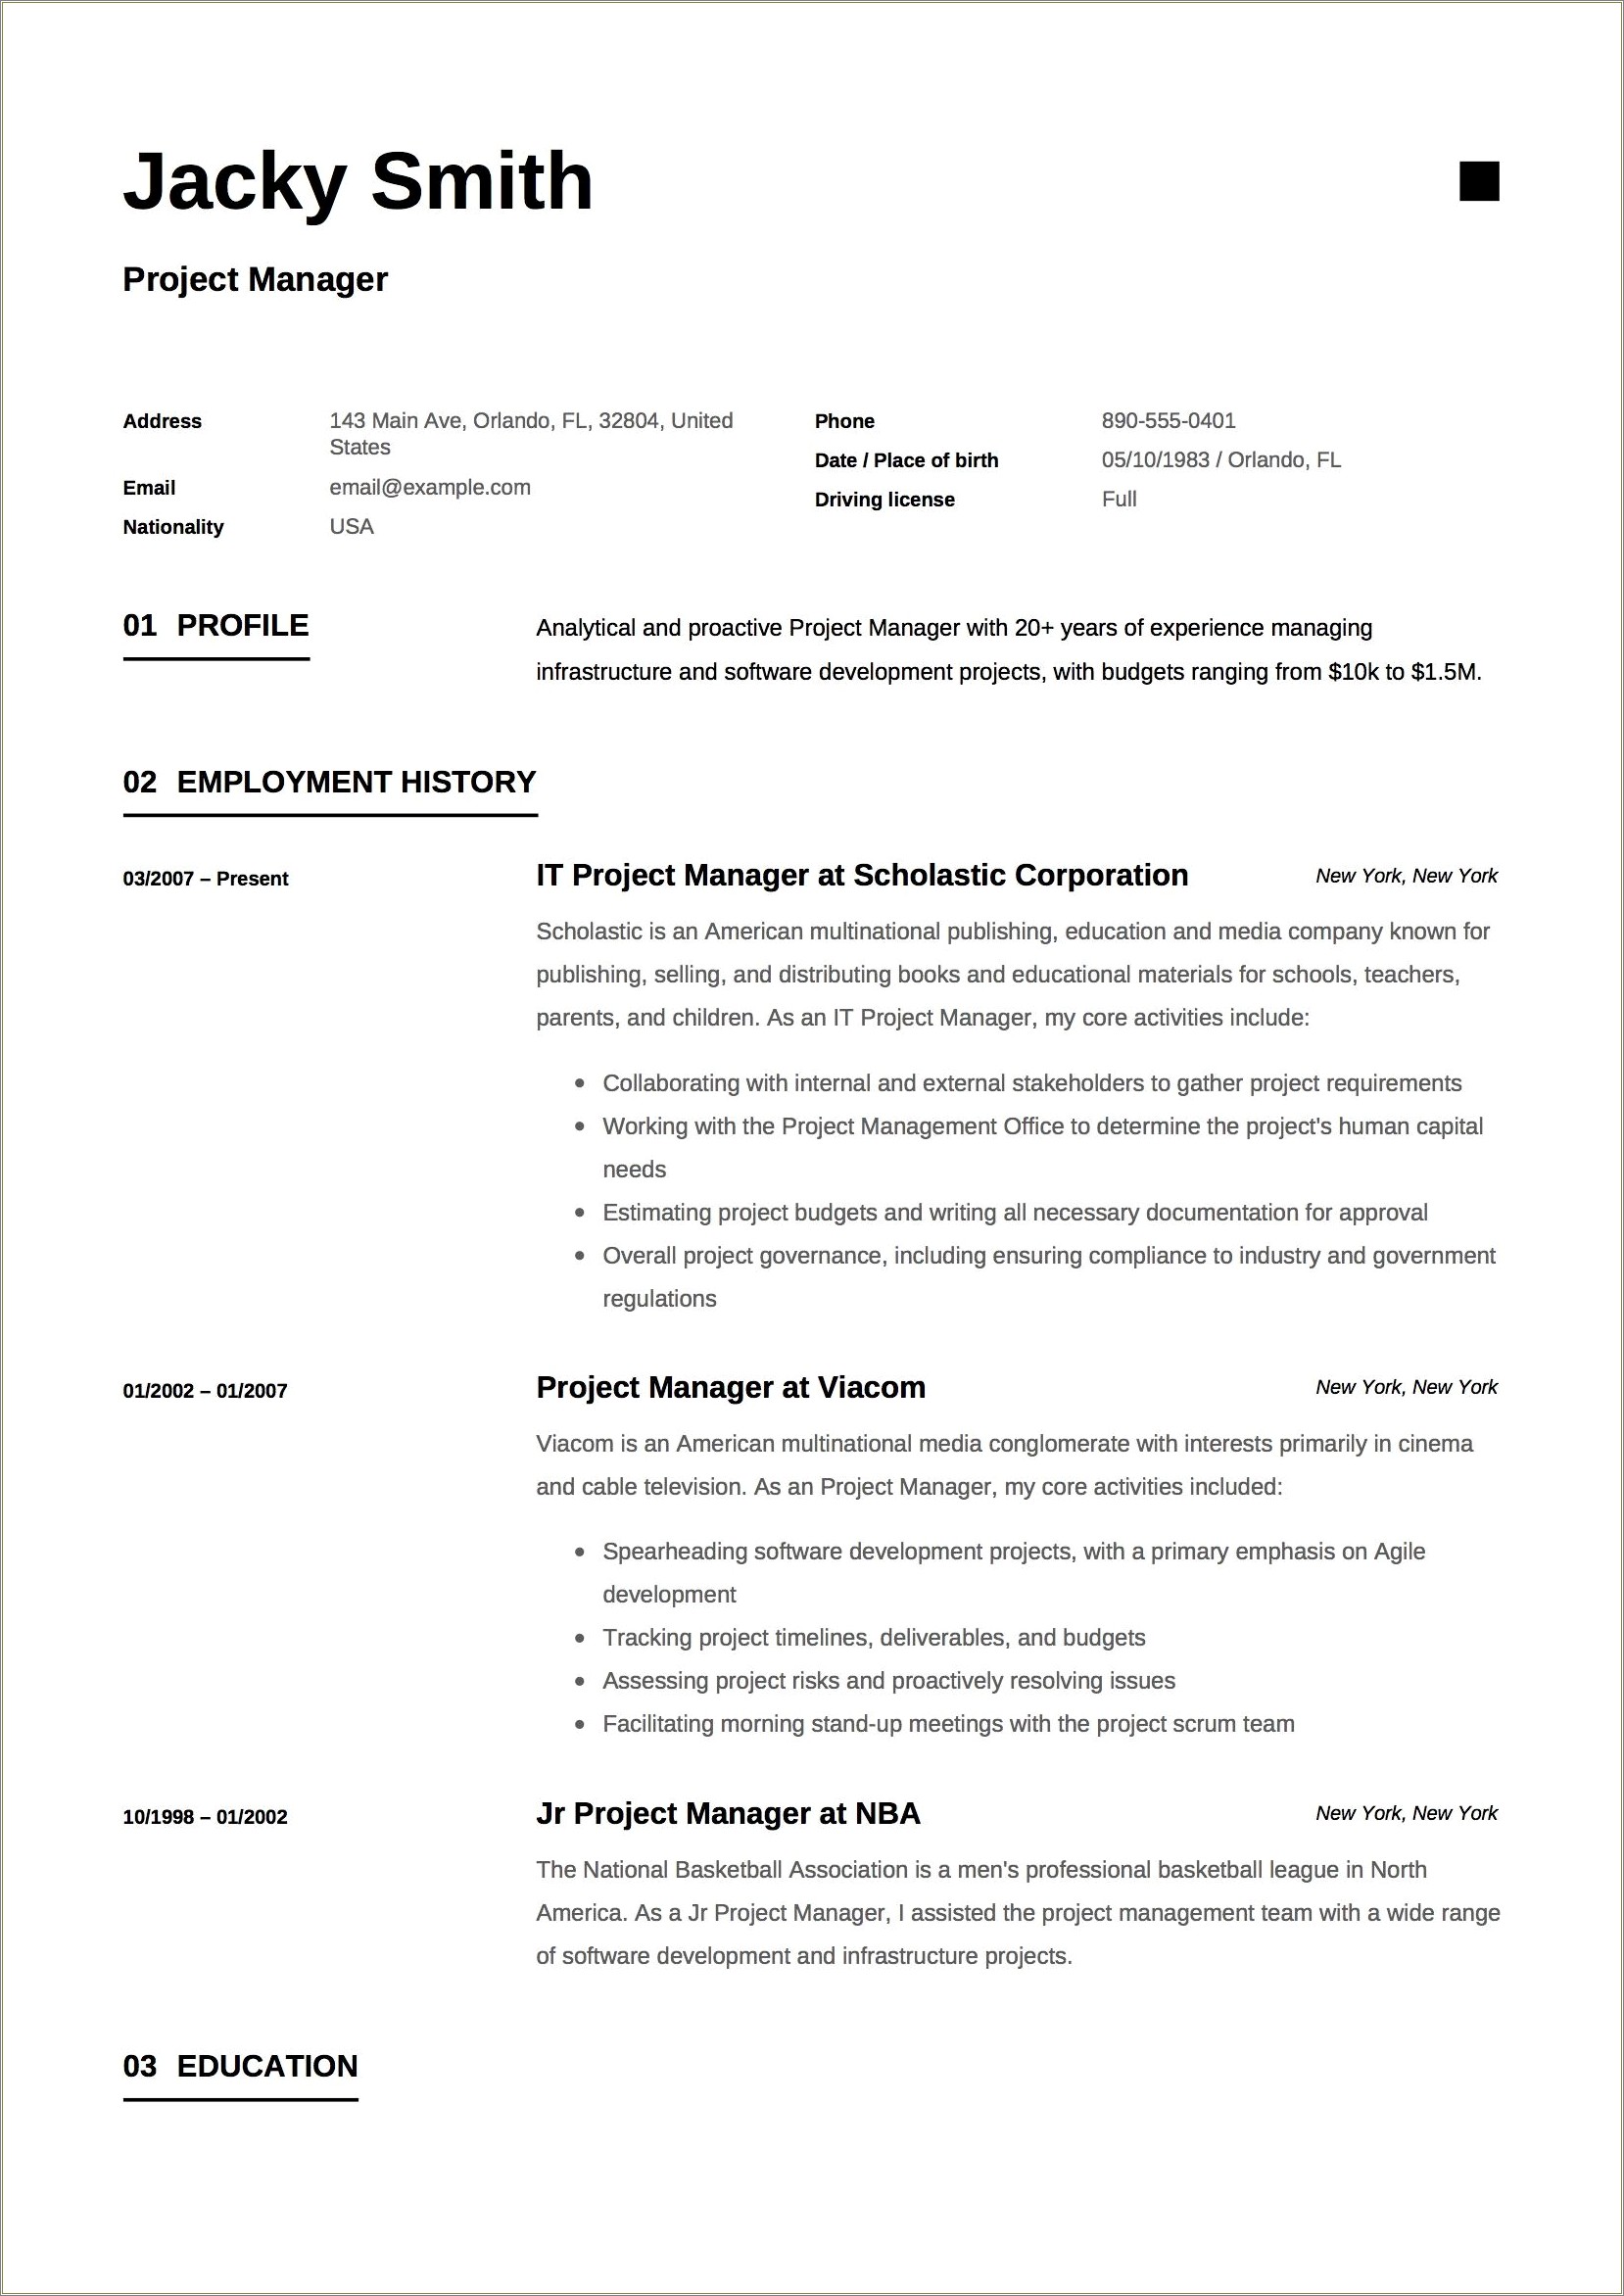 Profile Section Of Resume Project Manager